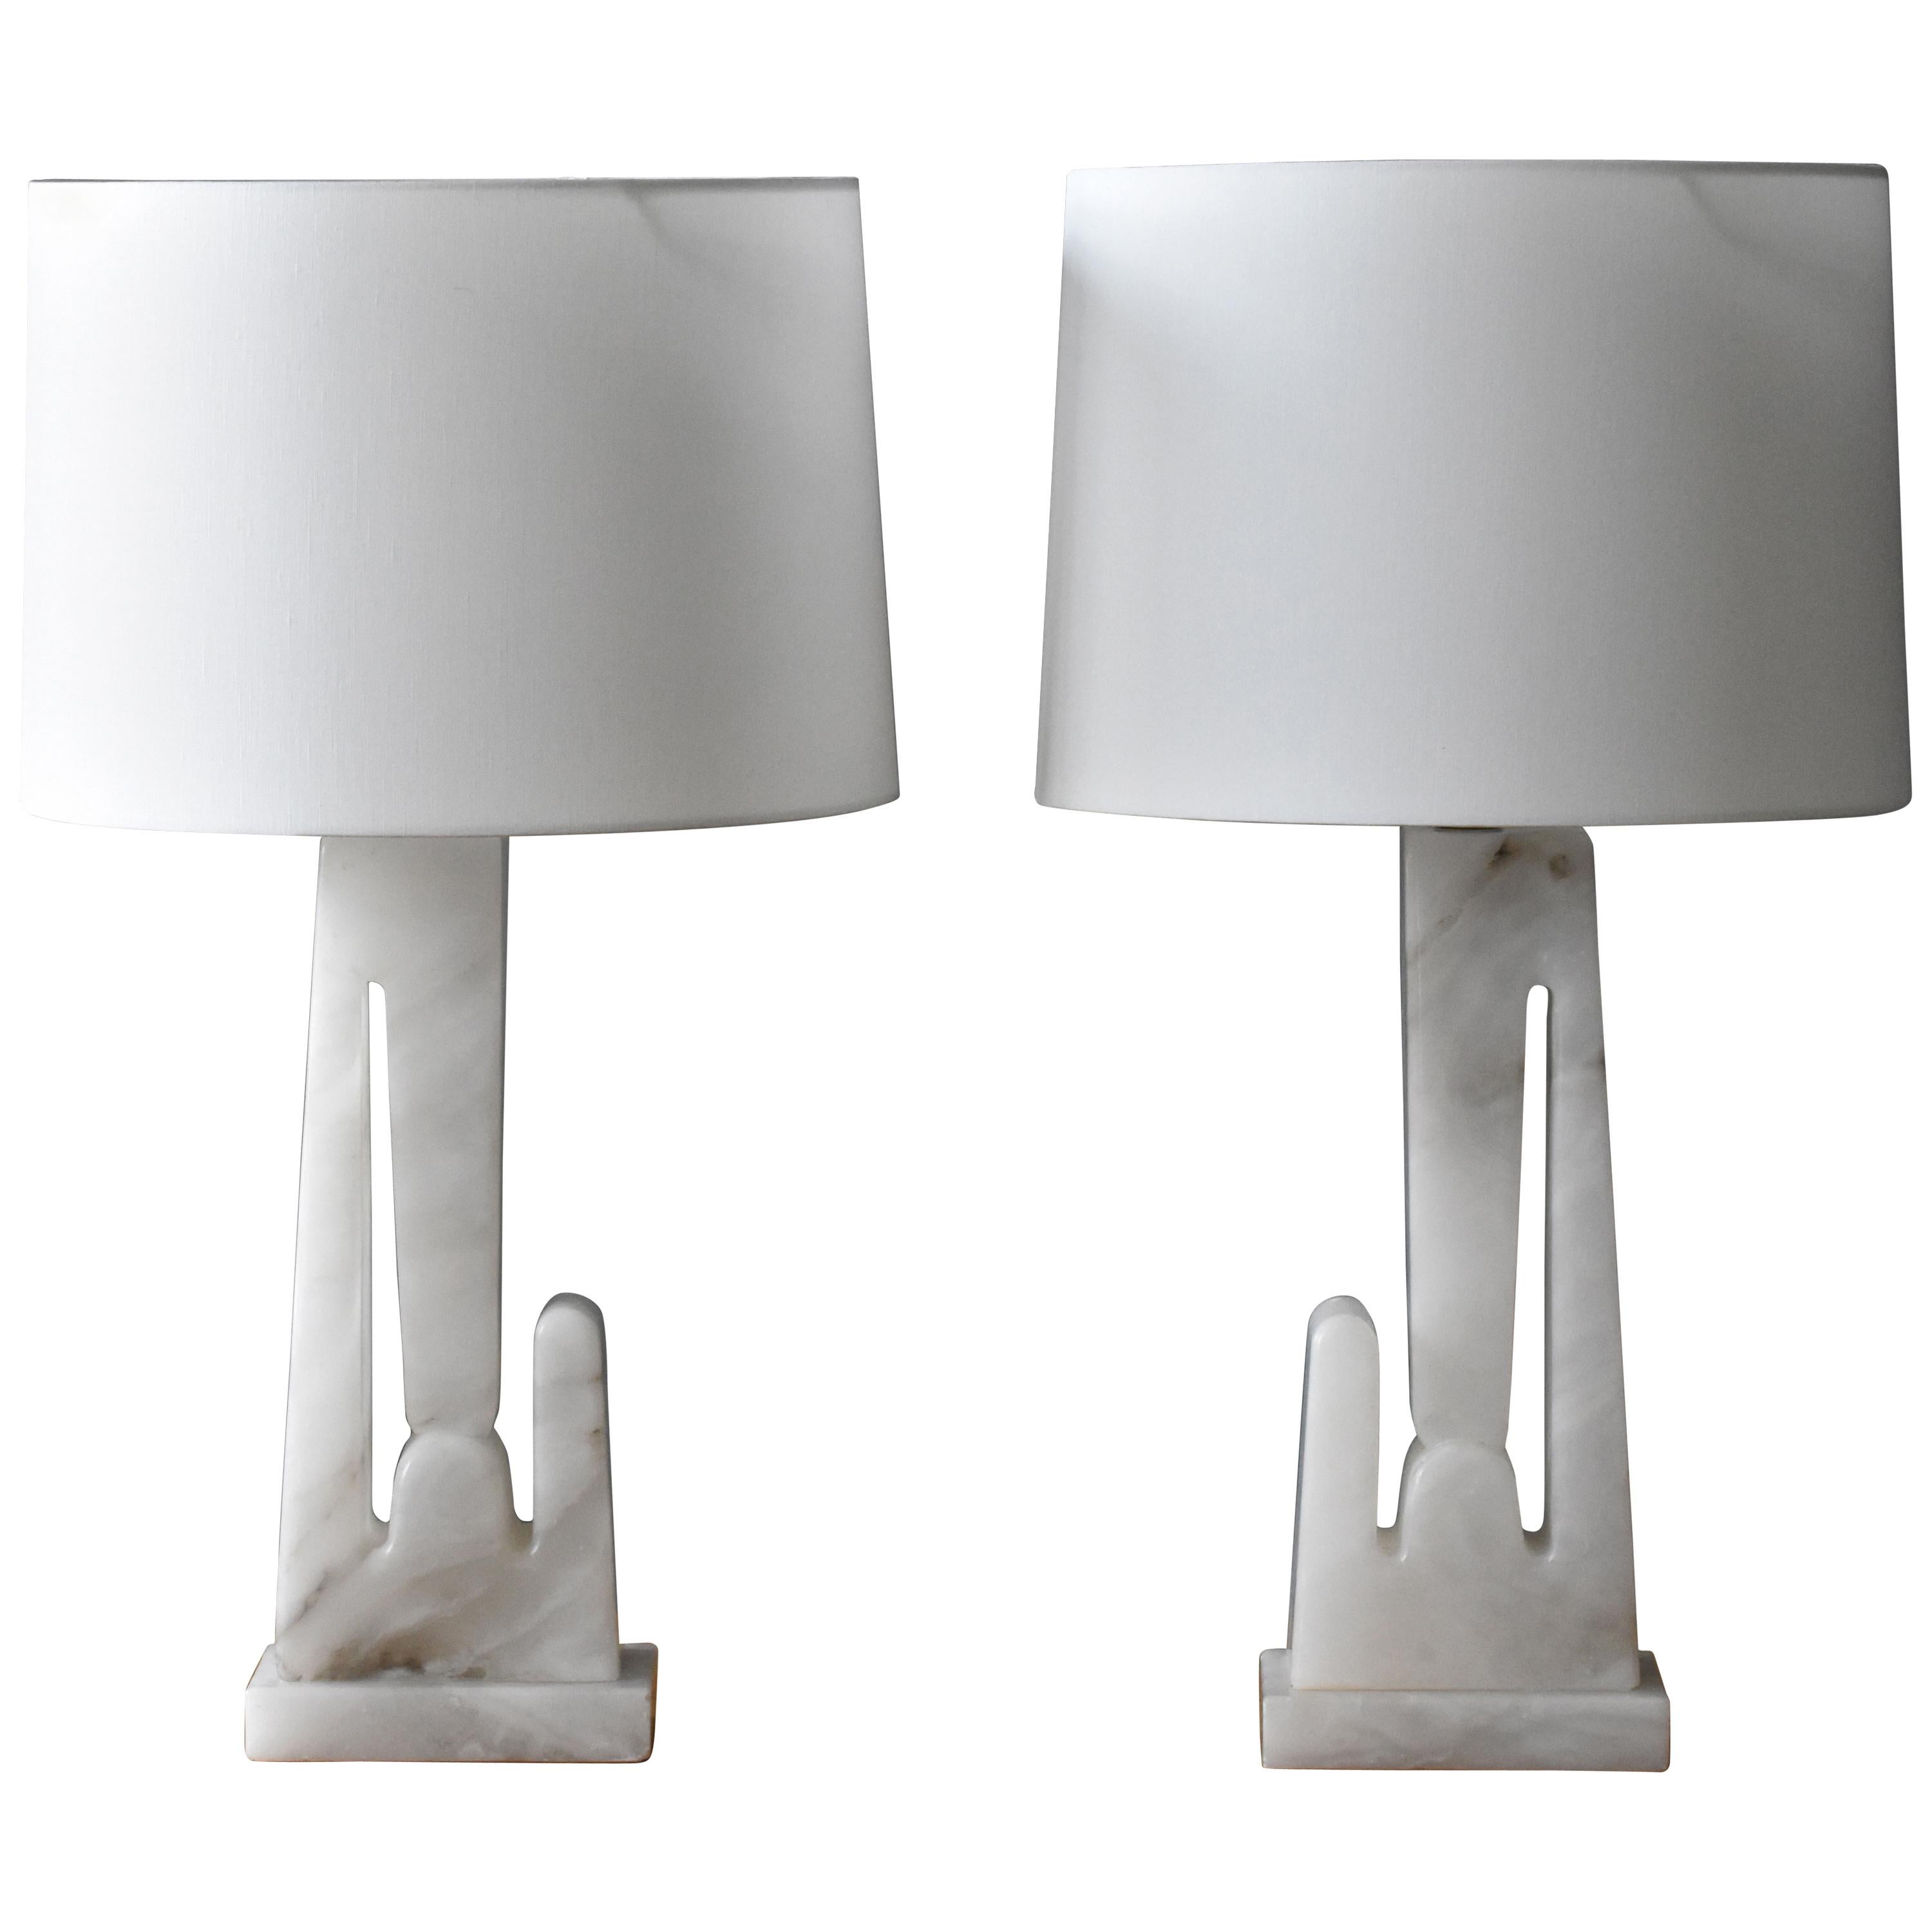 American Modernism, Abstract and Sculptural Table Lamps, Marble, Fabric, 1960s